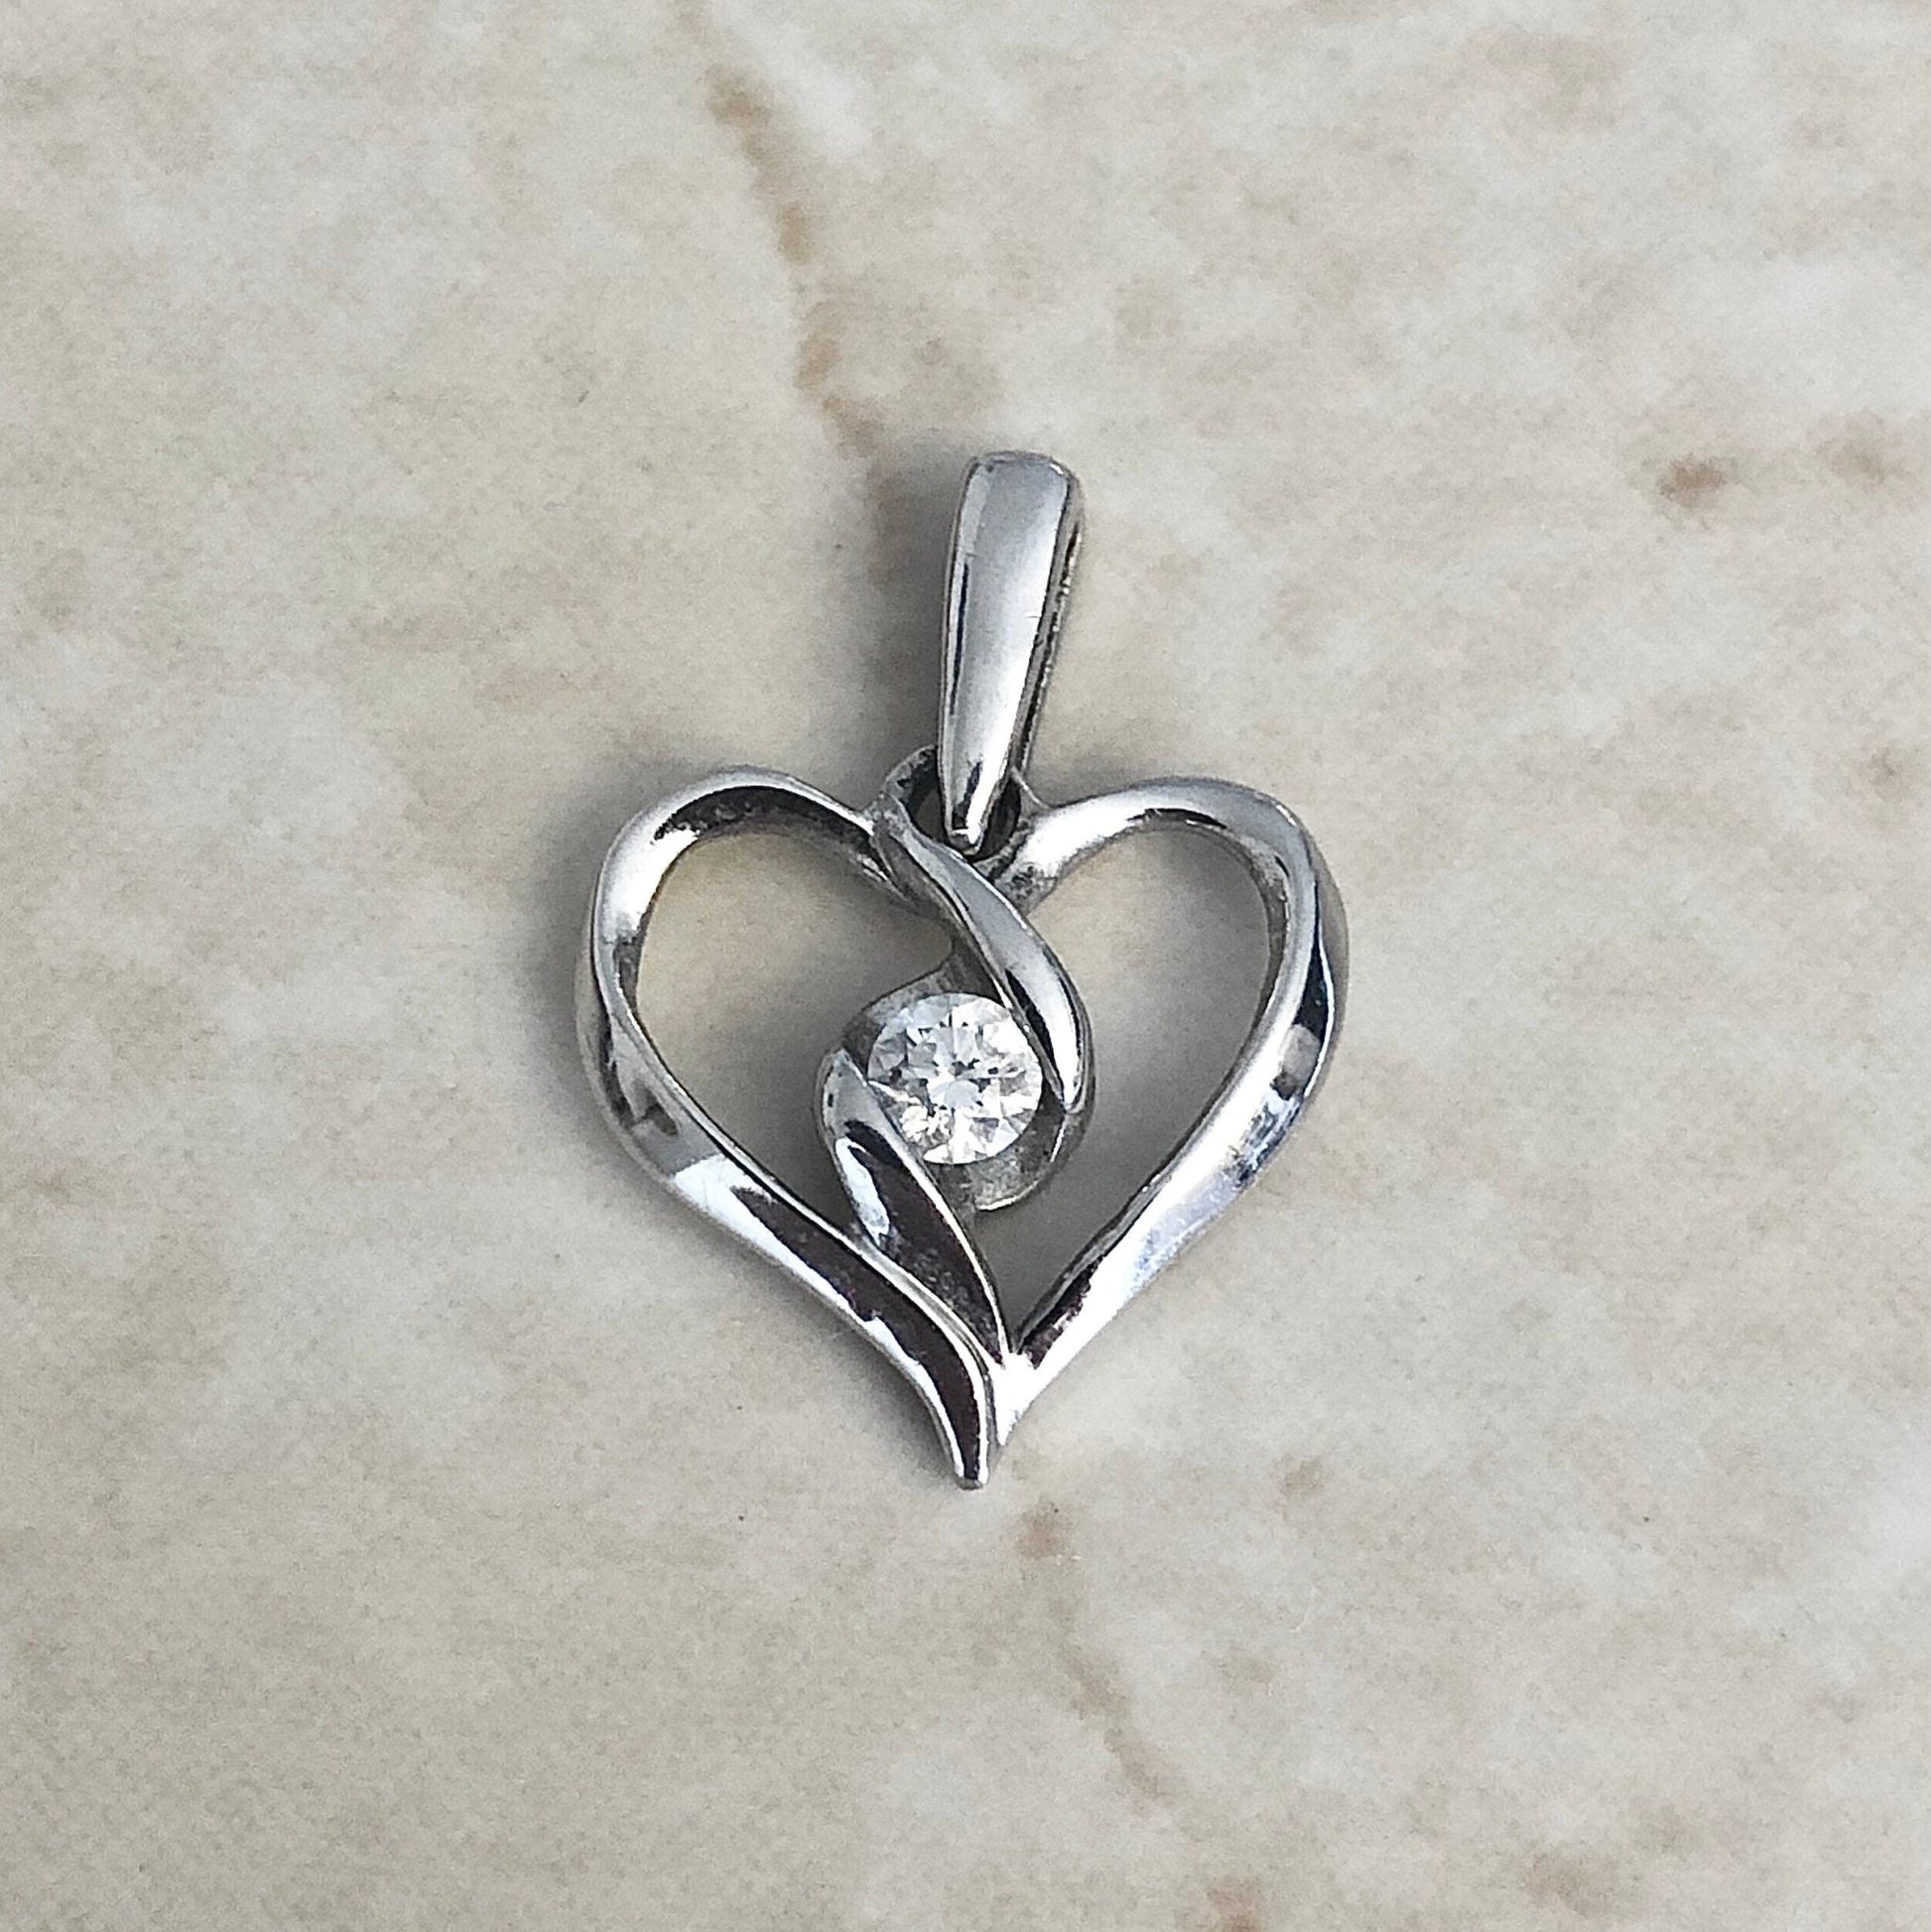 10K Diamond Heart Pendant Necklace - White Gold Solitaire Diamond Pendant - Diamond Necklace - Birthday Gift - Valentine’s Day Gift For Her